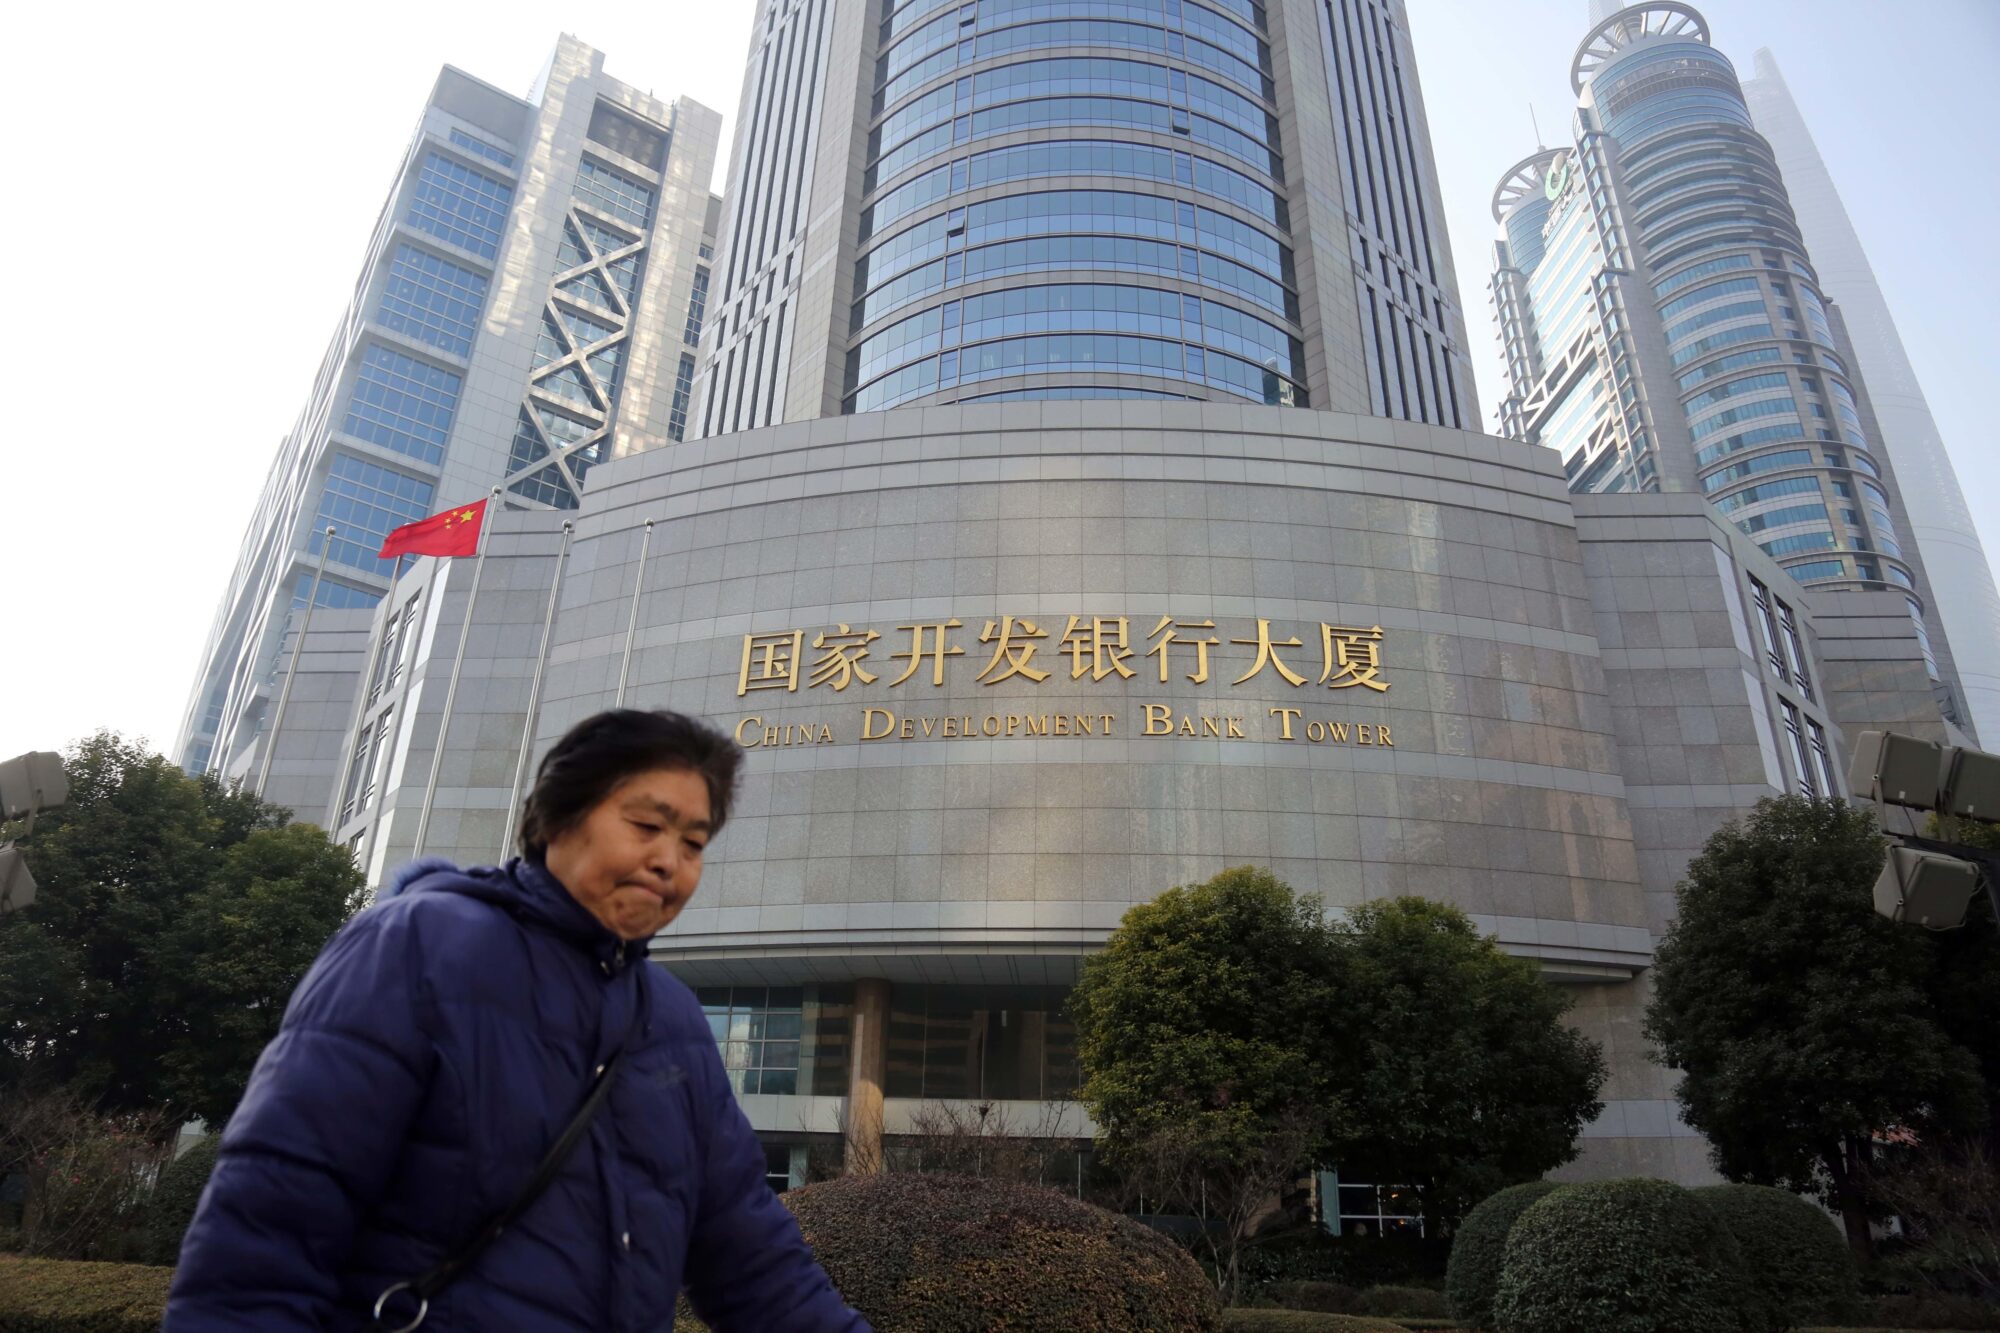 A woman walking in front of the China Development Bank building.